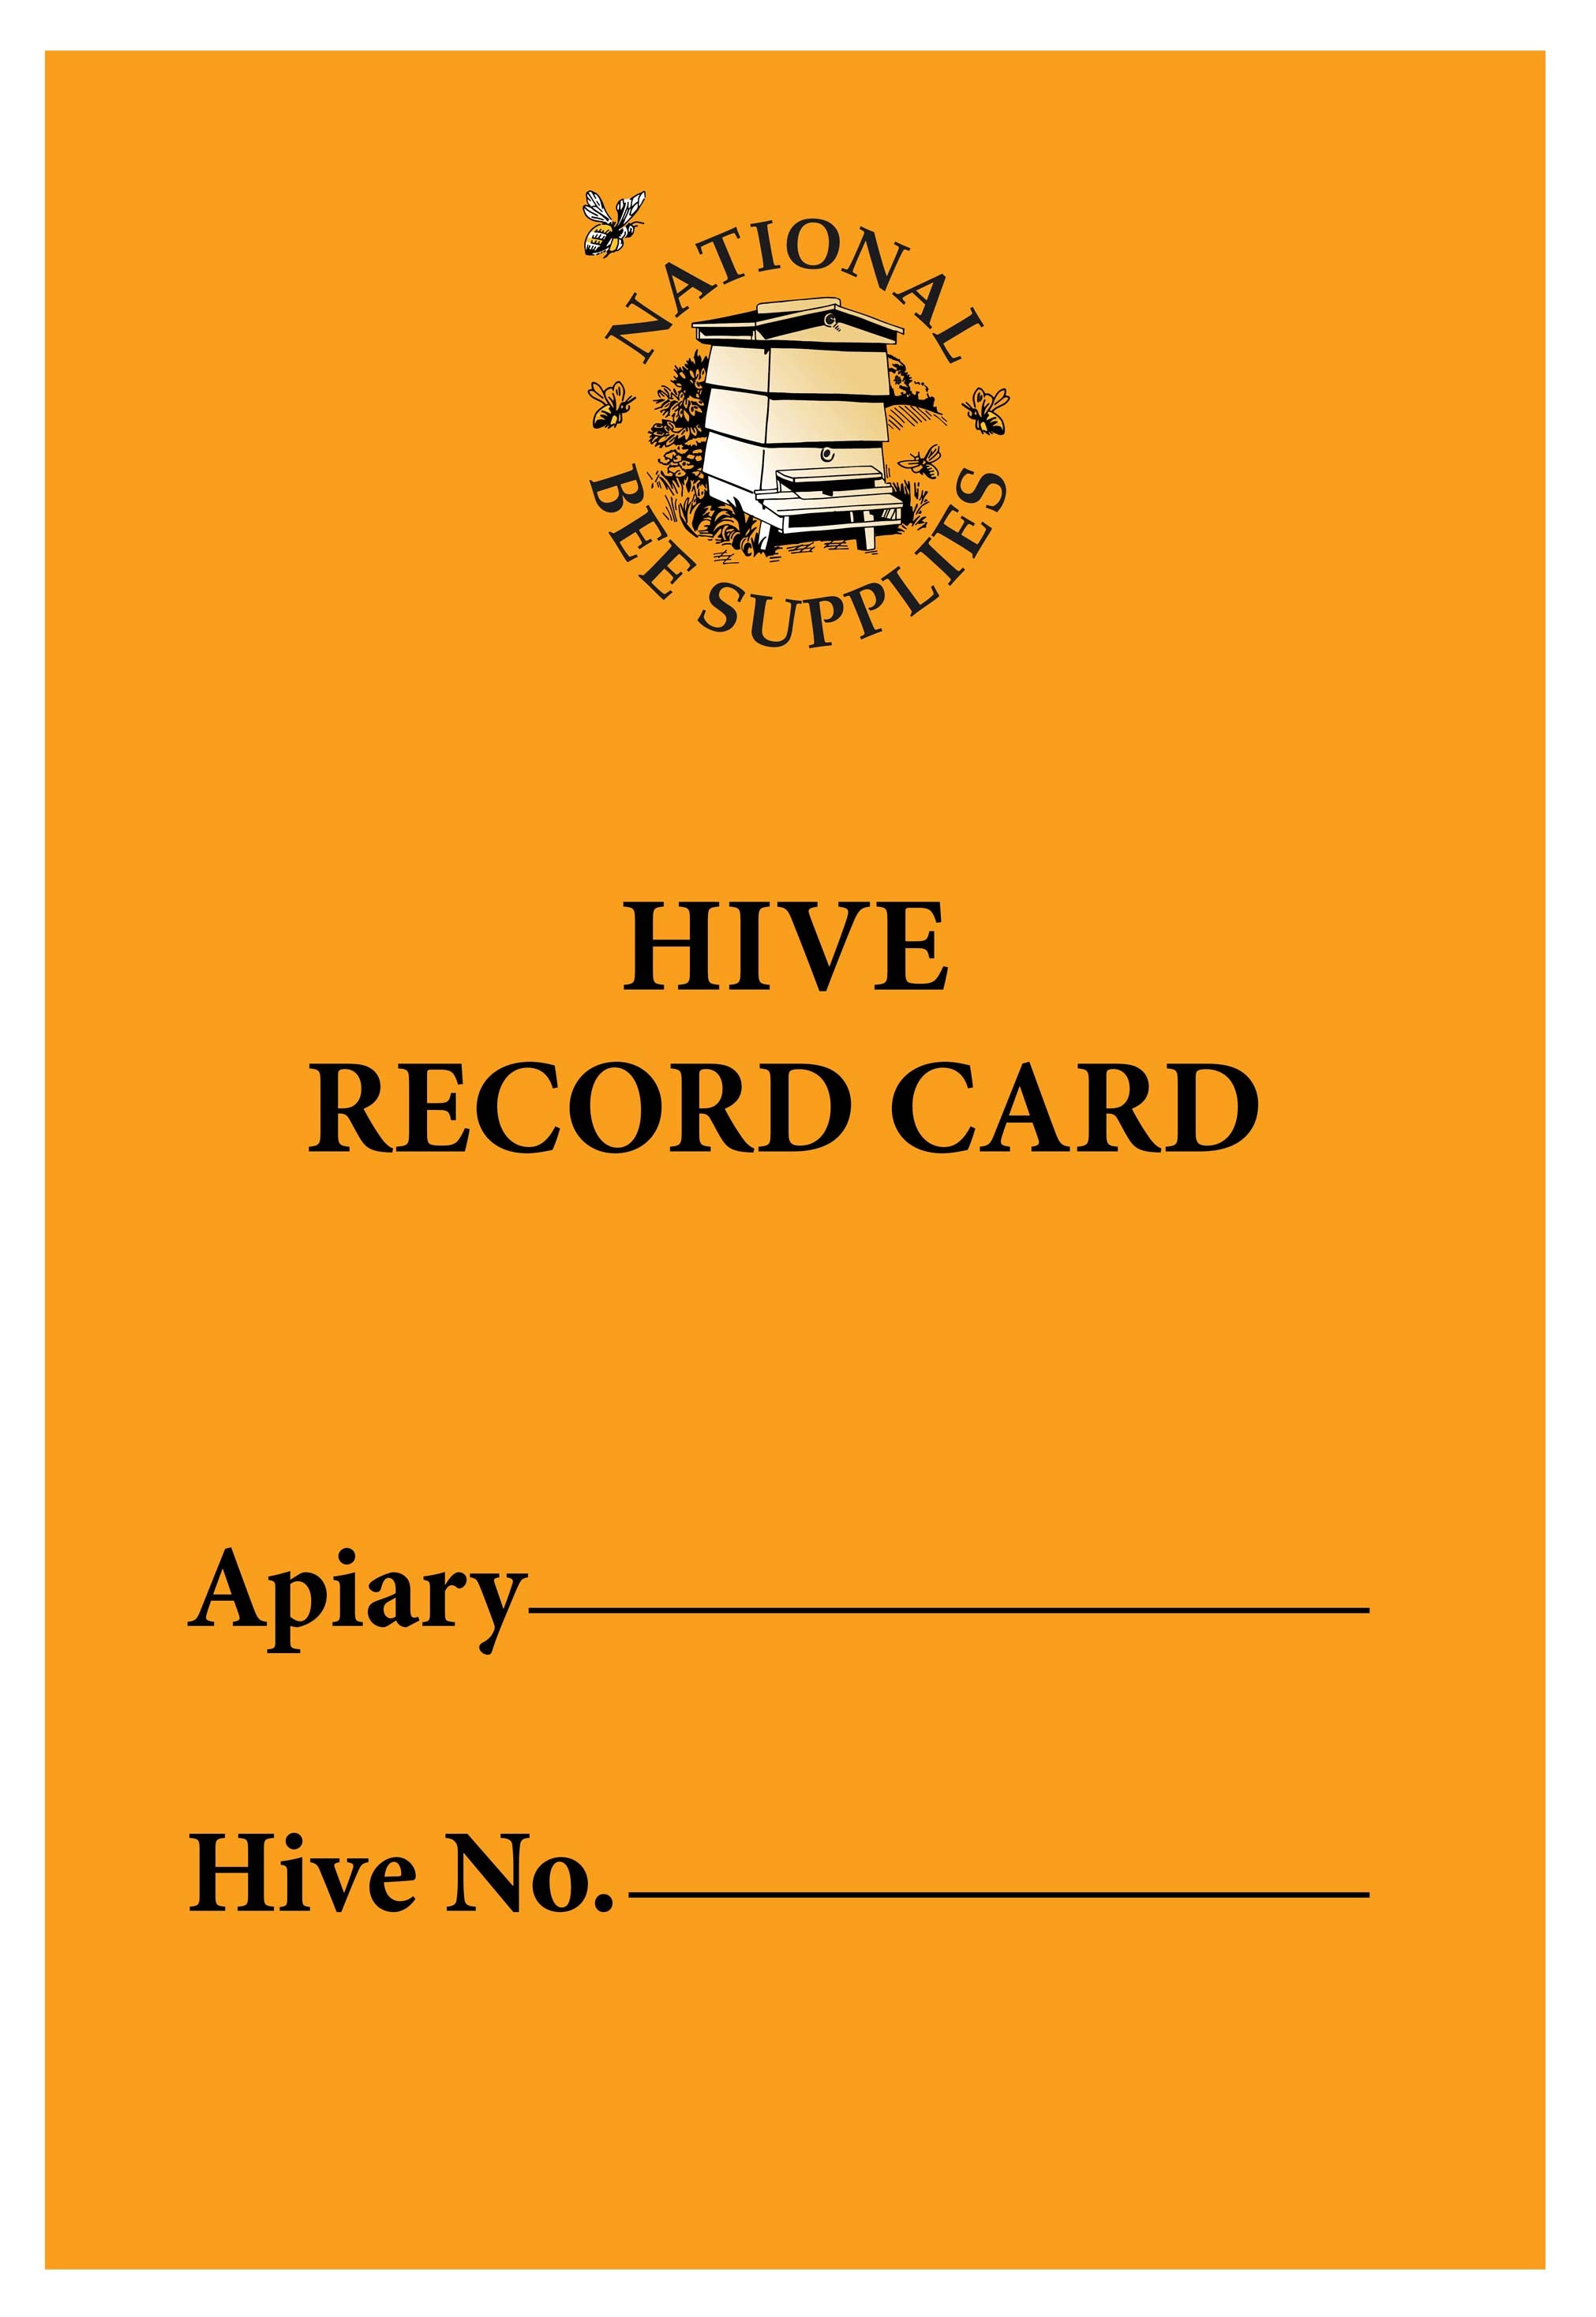 An image of Hive Record Card